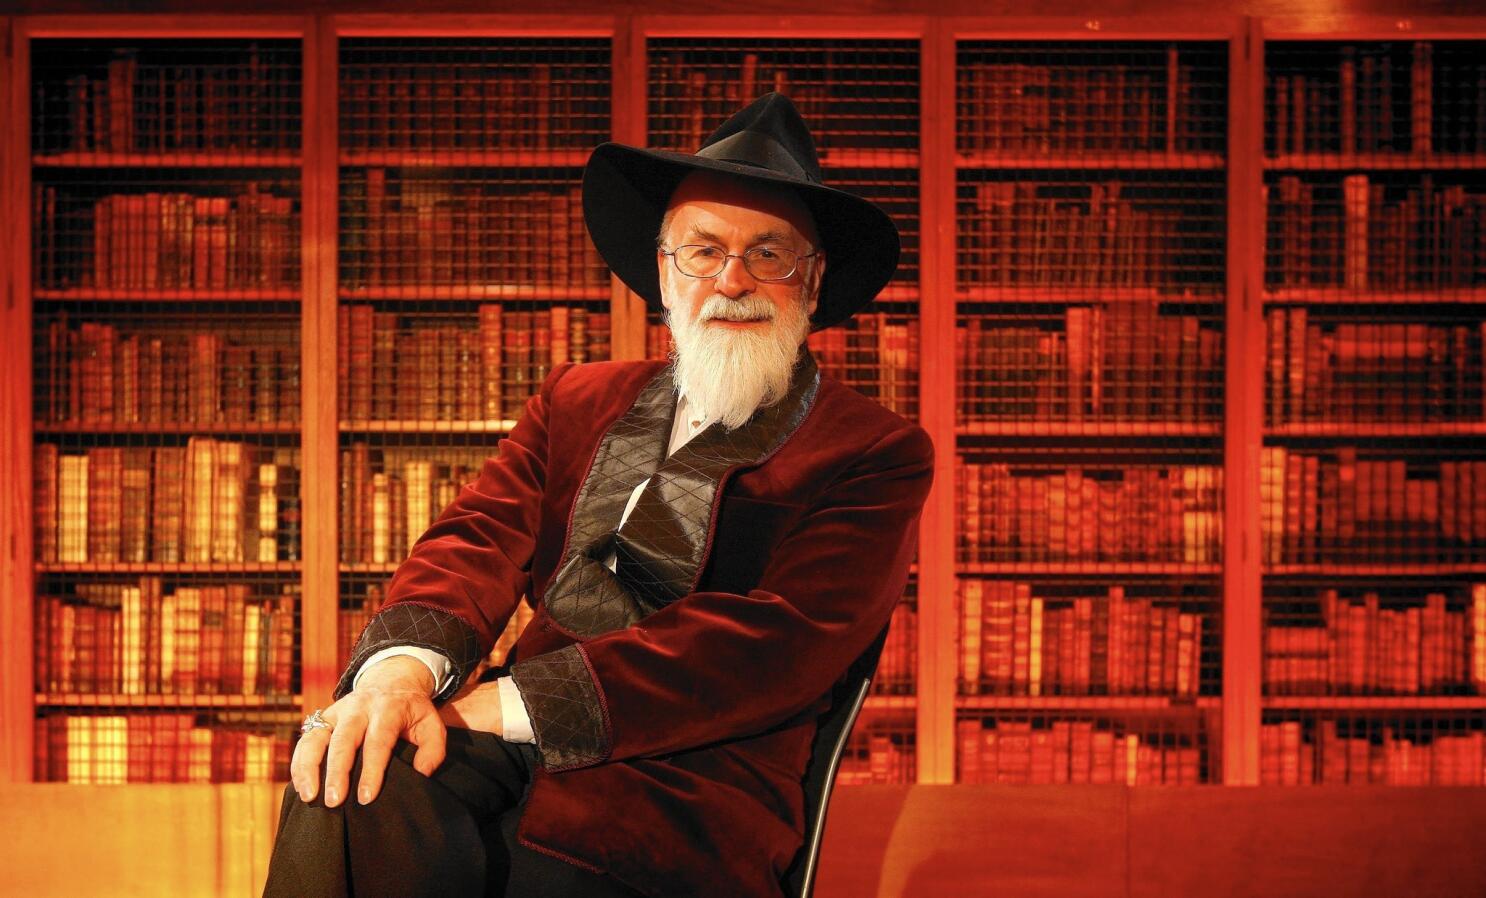 The Bookseller - Rights - Terry Pratchett's official biography snapped up  by Transworld